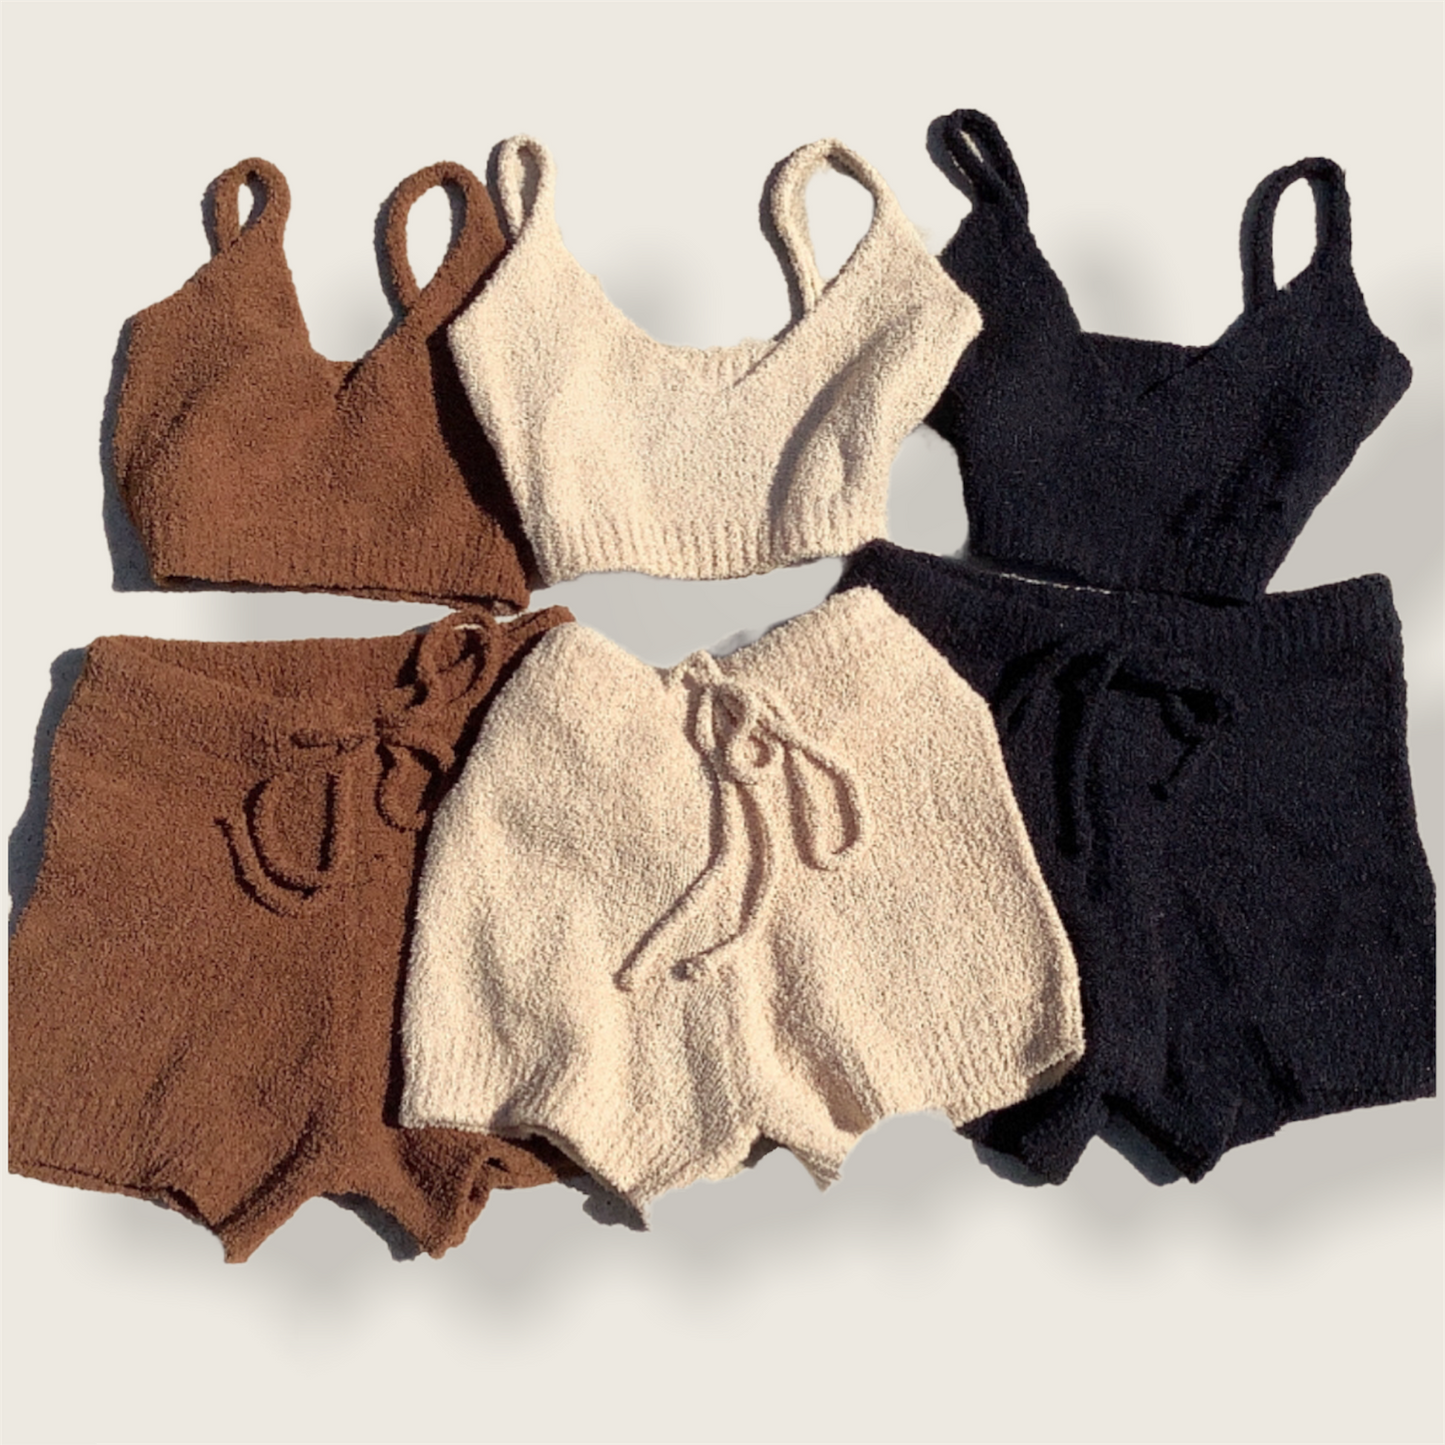 Loungewear Essentials 2 Piece set in Chocolate, Beige and Black color